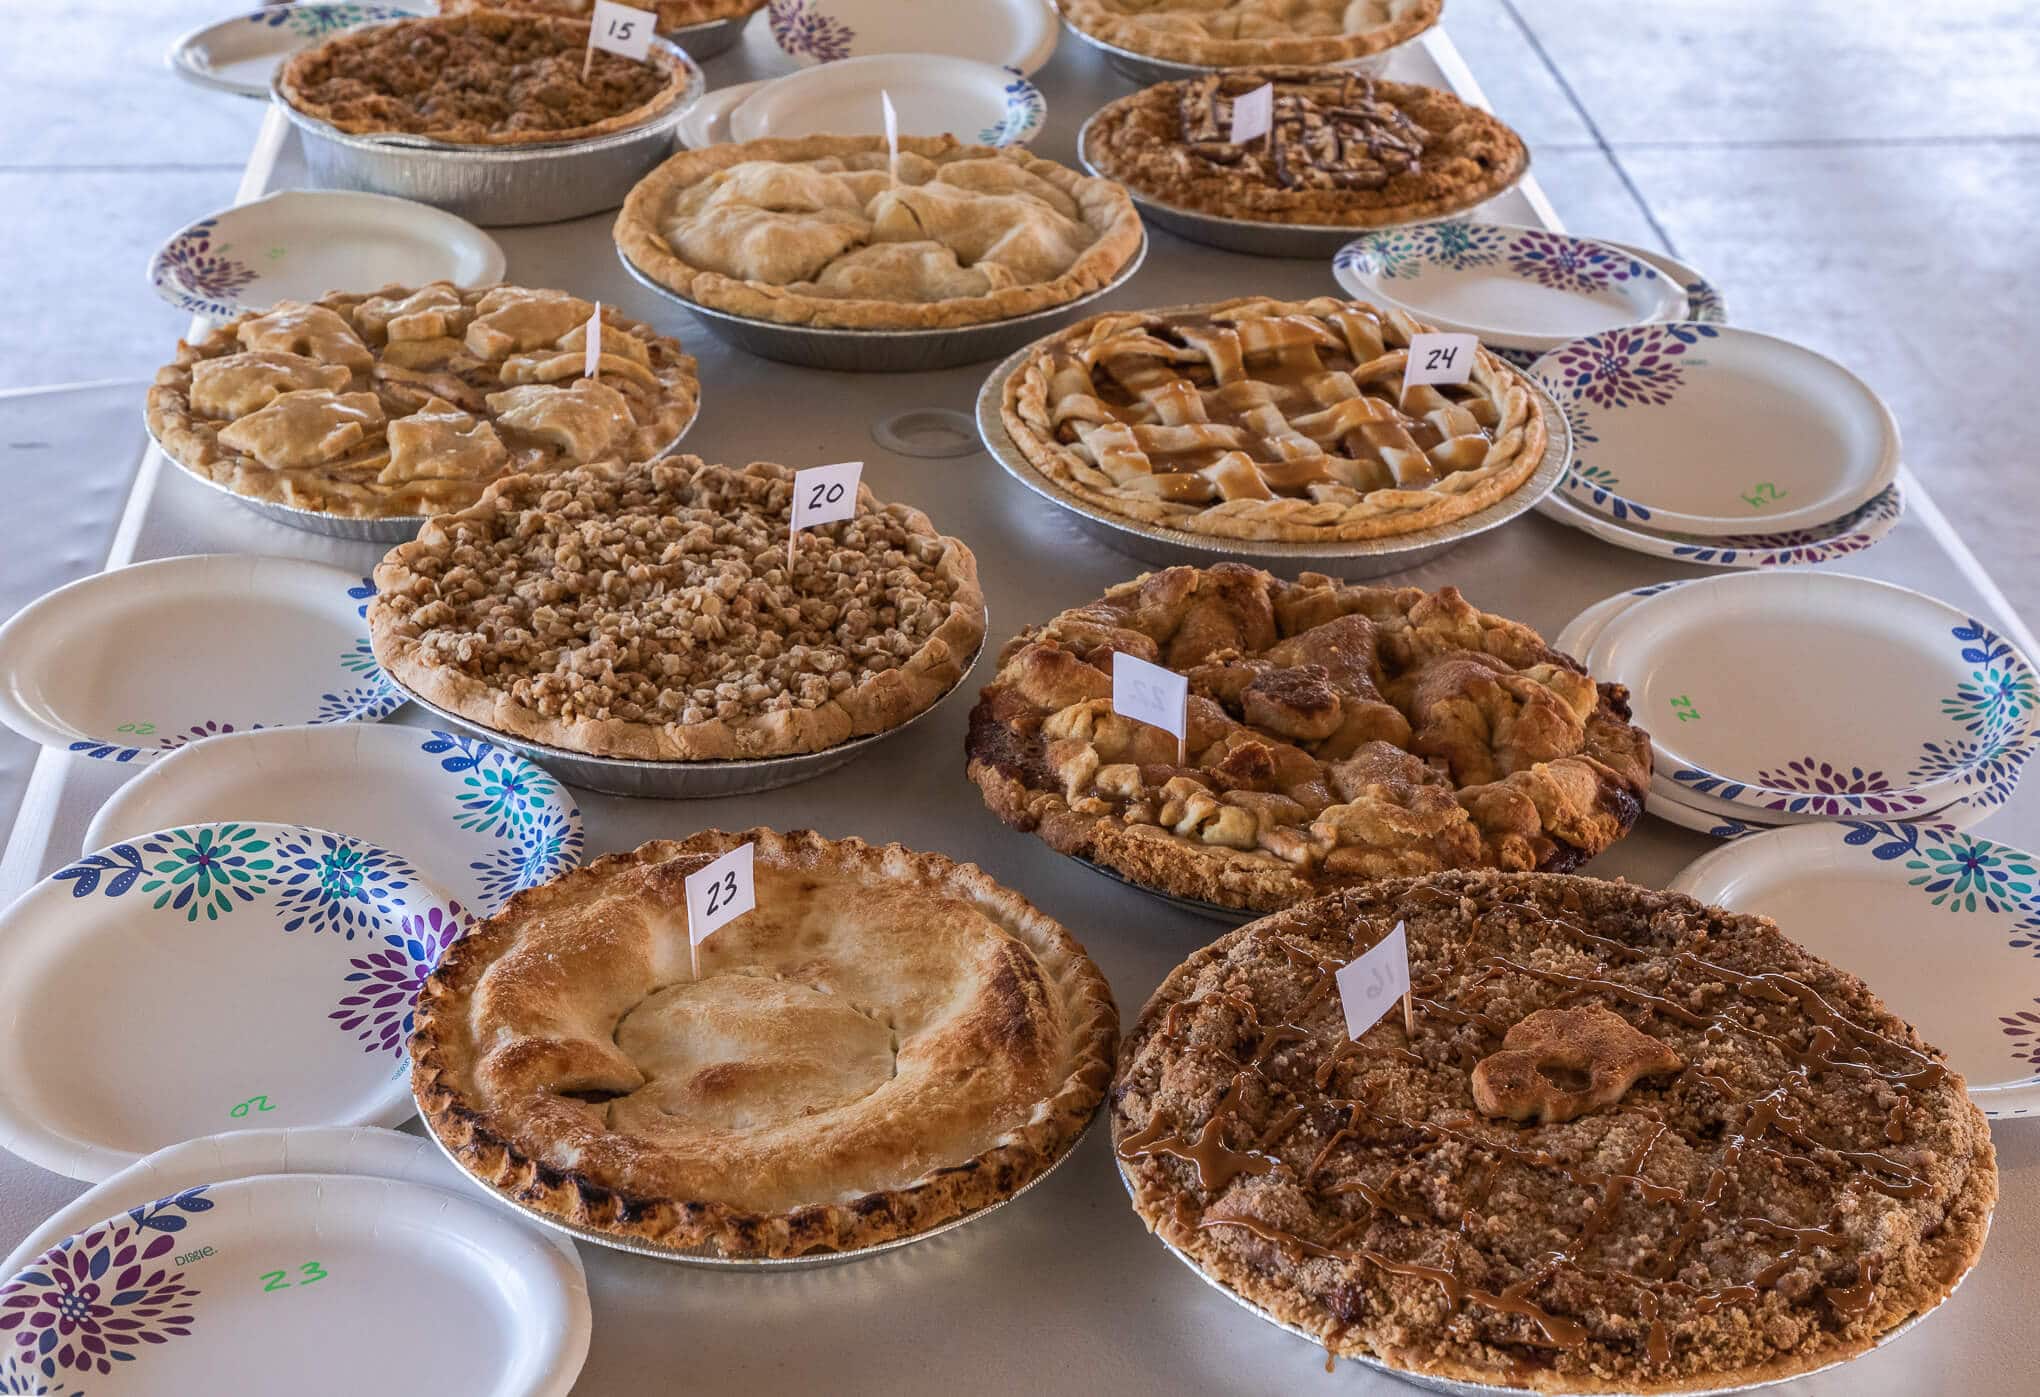 several baked pies at a picnic table at the festival